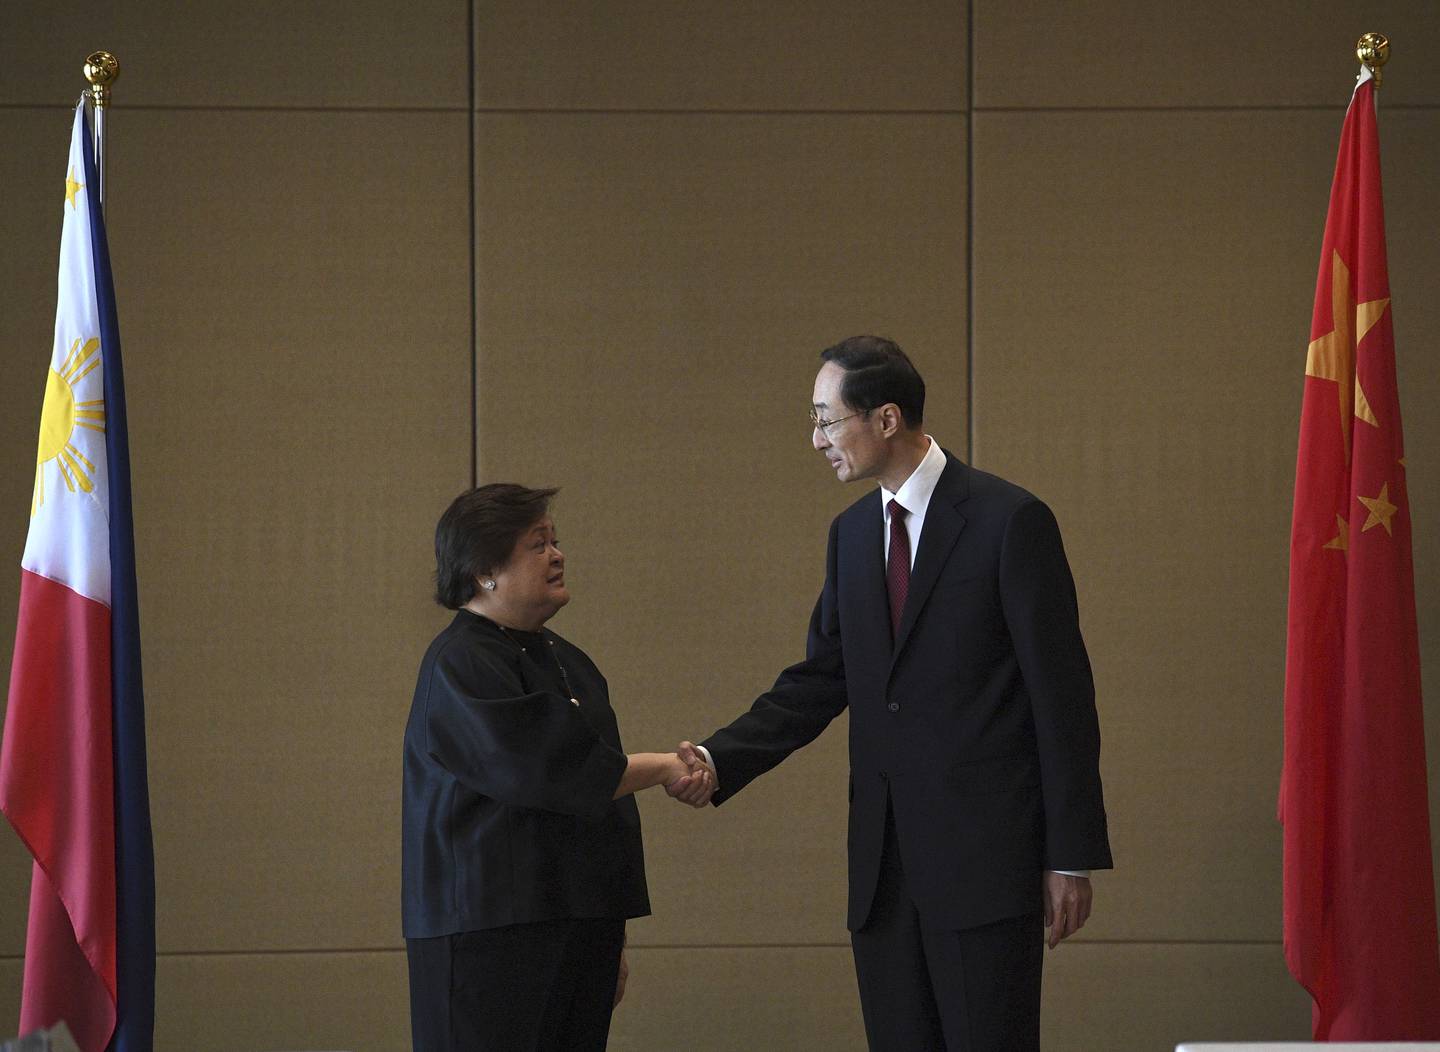 Theresa Lazaro, left, Philippines' Undersecretary for Bilateral Relations and Asian Affairs of the Department of Foreign Affairs, shake hands with Sun Weidong, China's Vice Foreign Minister, prior to the start of the Philippines-China Foreign Ministry consultation meeting at a hotel in Manila on Thursday, March 23, 2023.